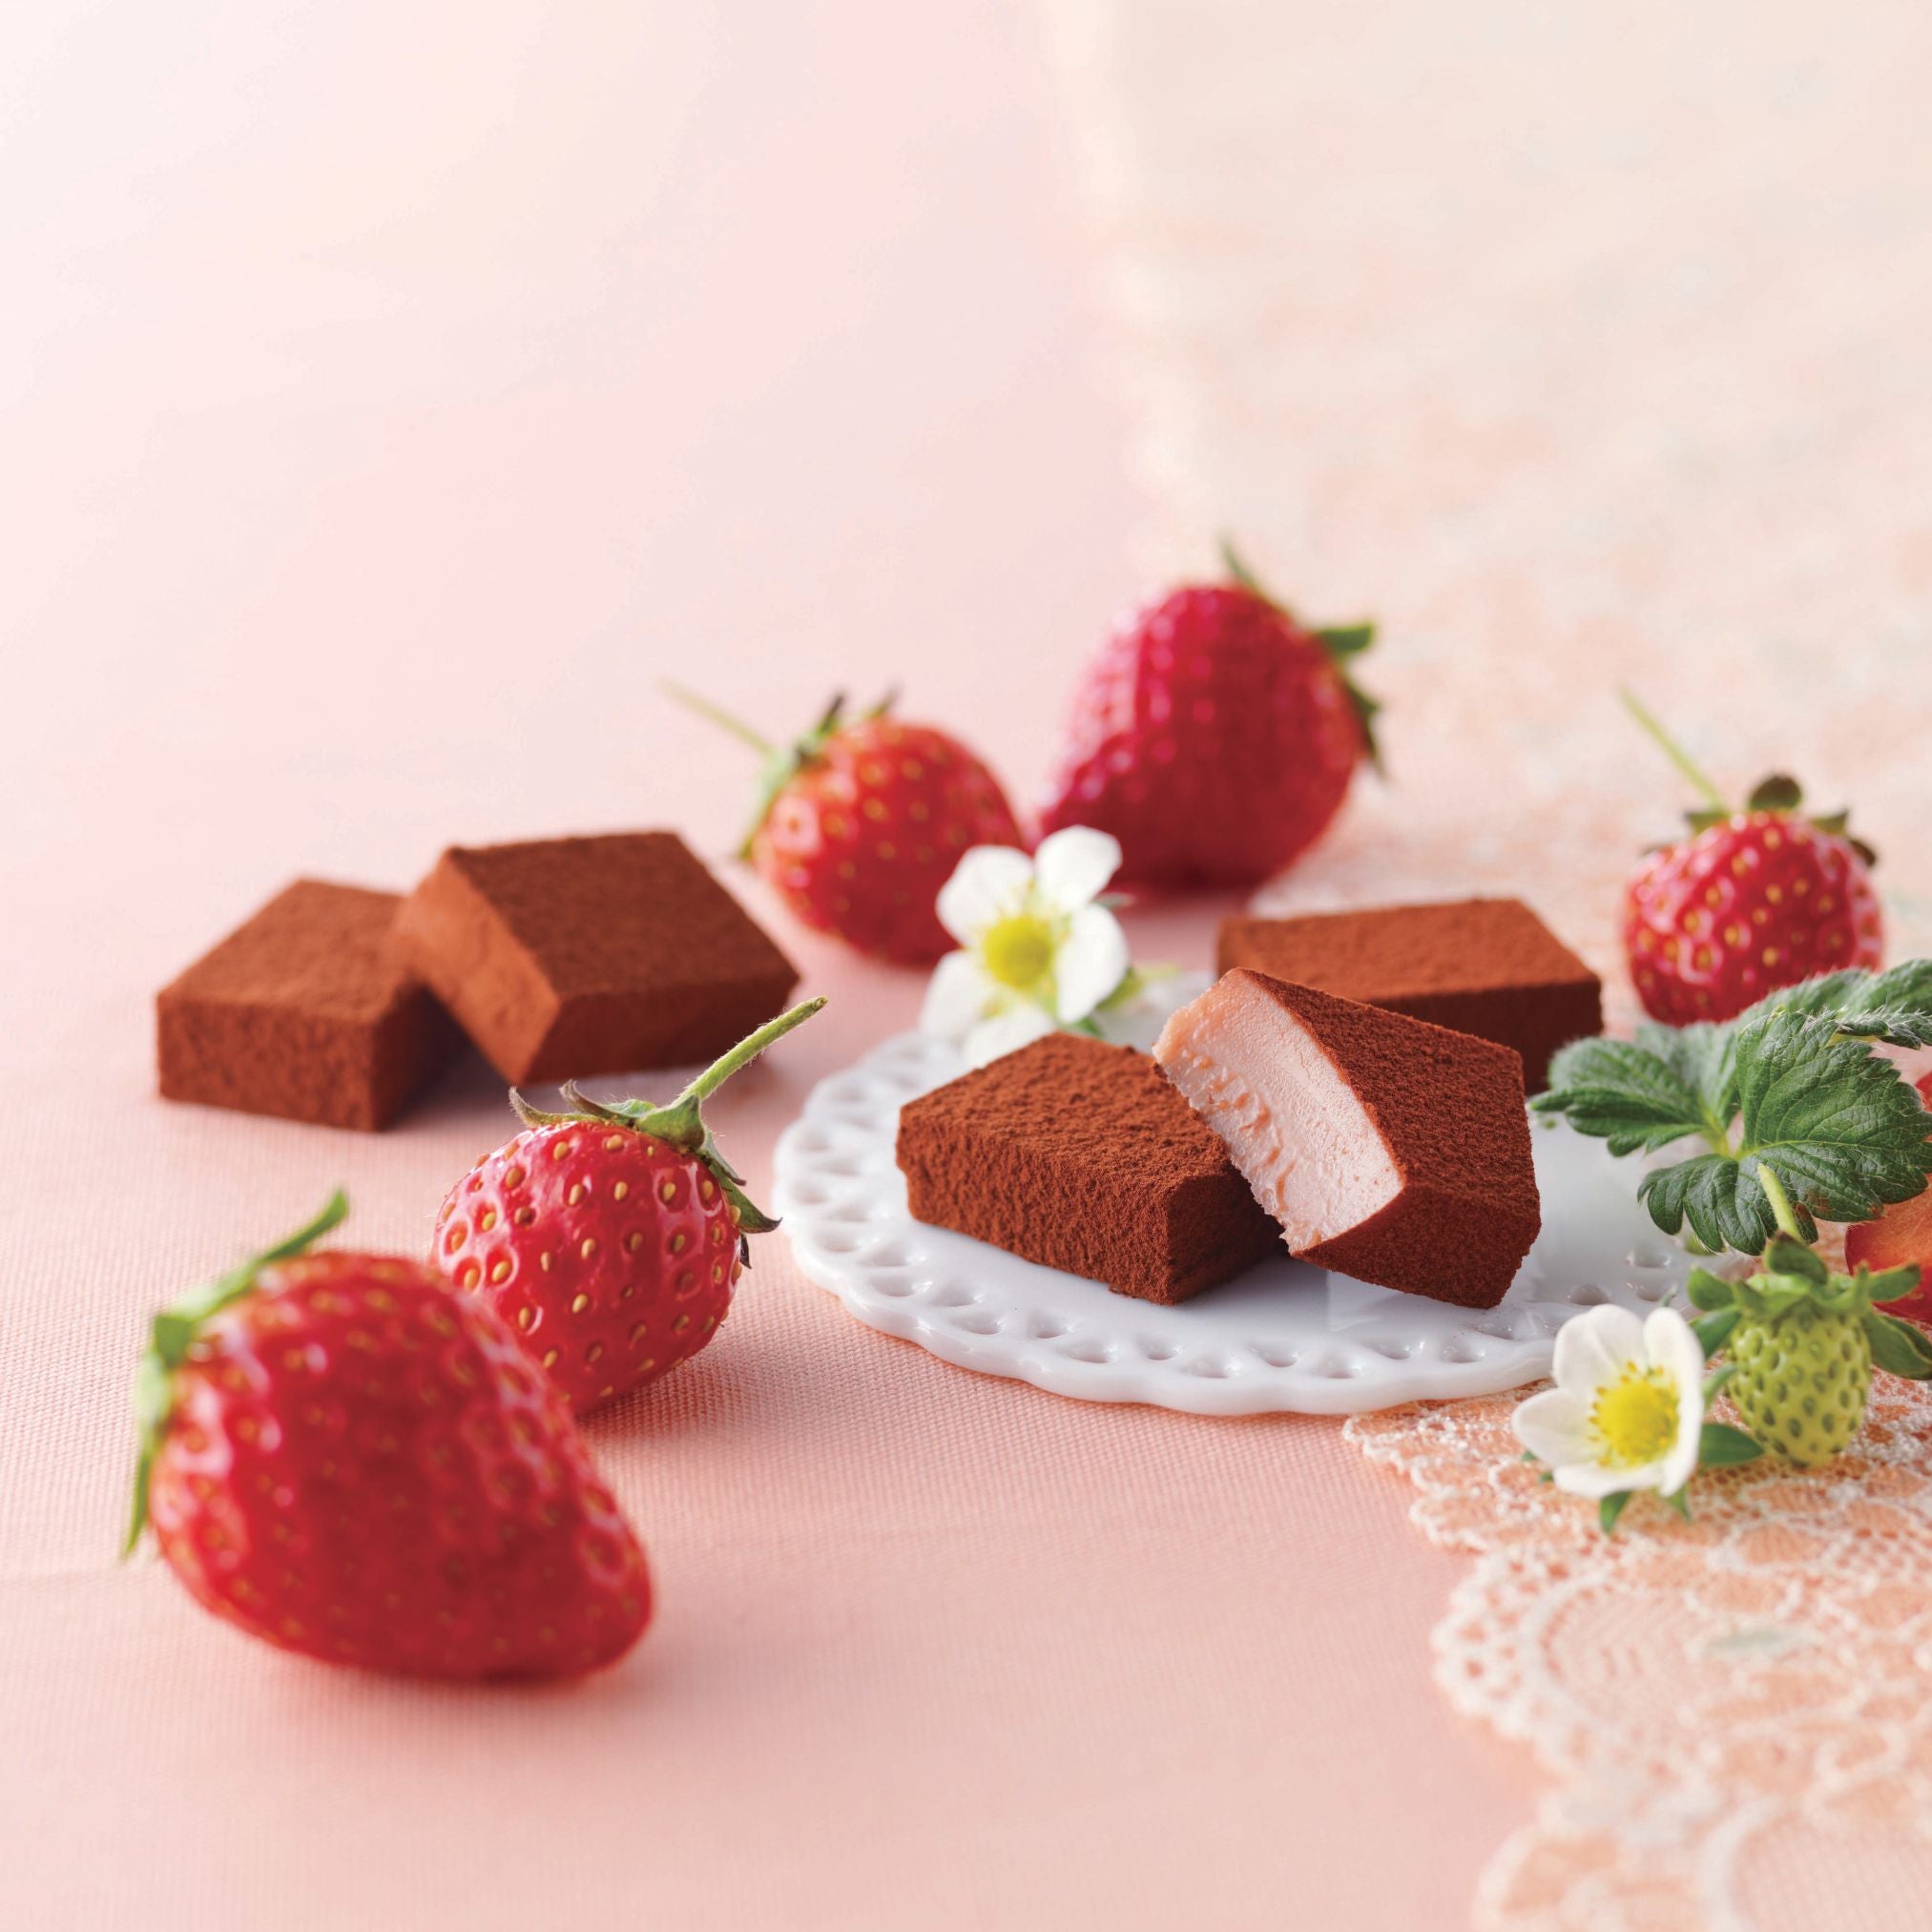 ROYCE' Chocolate - Nama Chocolate "Strawberry" - Image shows brown blocks of chocolates with accents of a white coaster, red strawberries, and green leaves. Background is in pink.